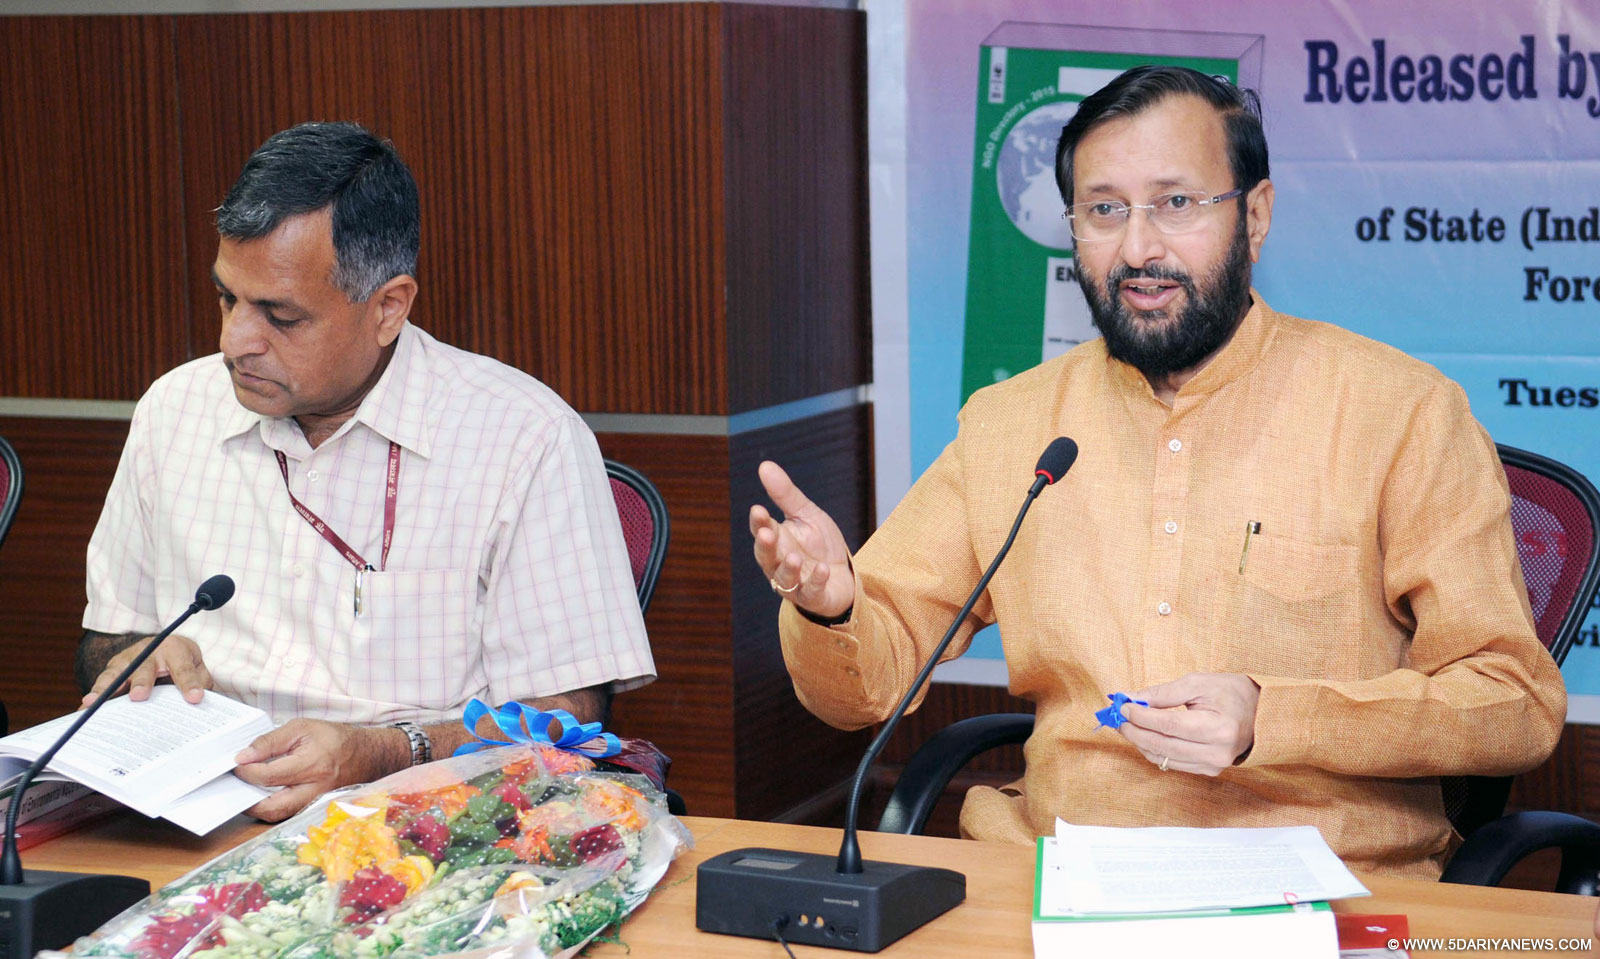 The Minister of State for Environment, Forest and Climate Change (Independent Charge), Shri Prakash Javadekar addressing after releasing the NGO Directory, in New Delhi on October 06, 2015. The Secretary, Ministry of Environment, Forest and Climate Change, Shri Ashok Lavasa is also seen.